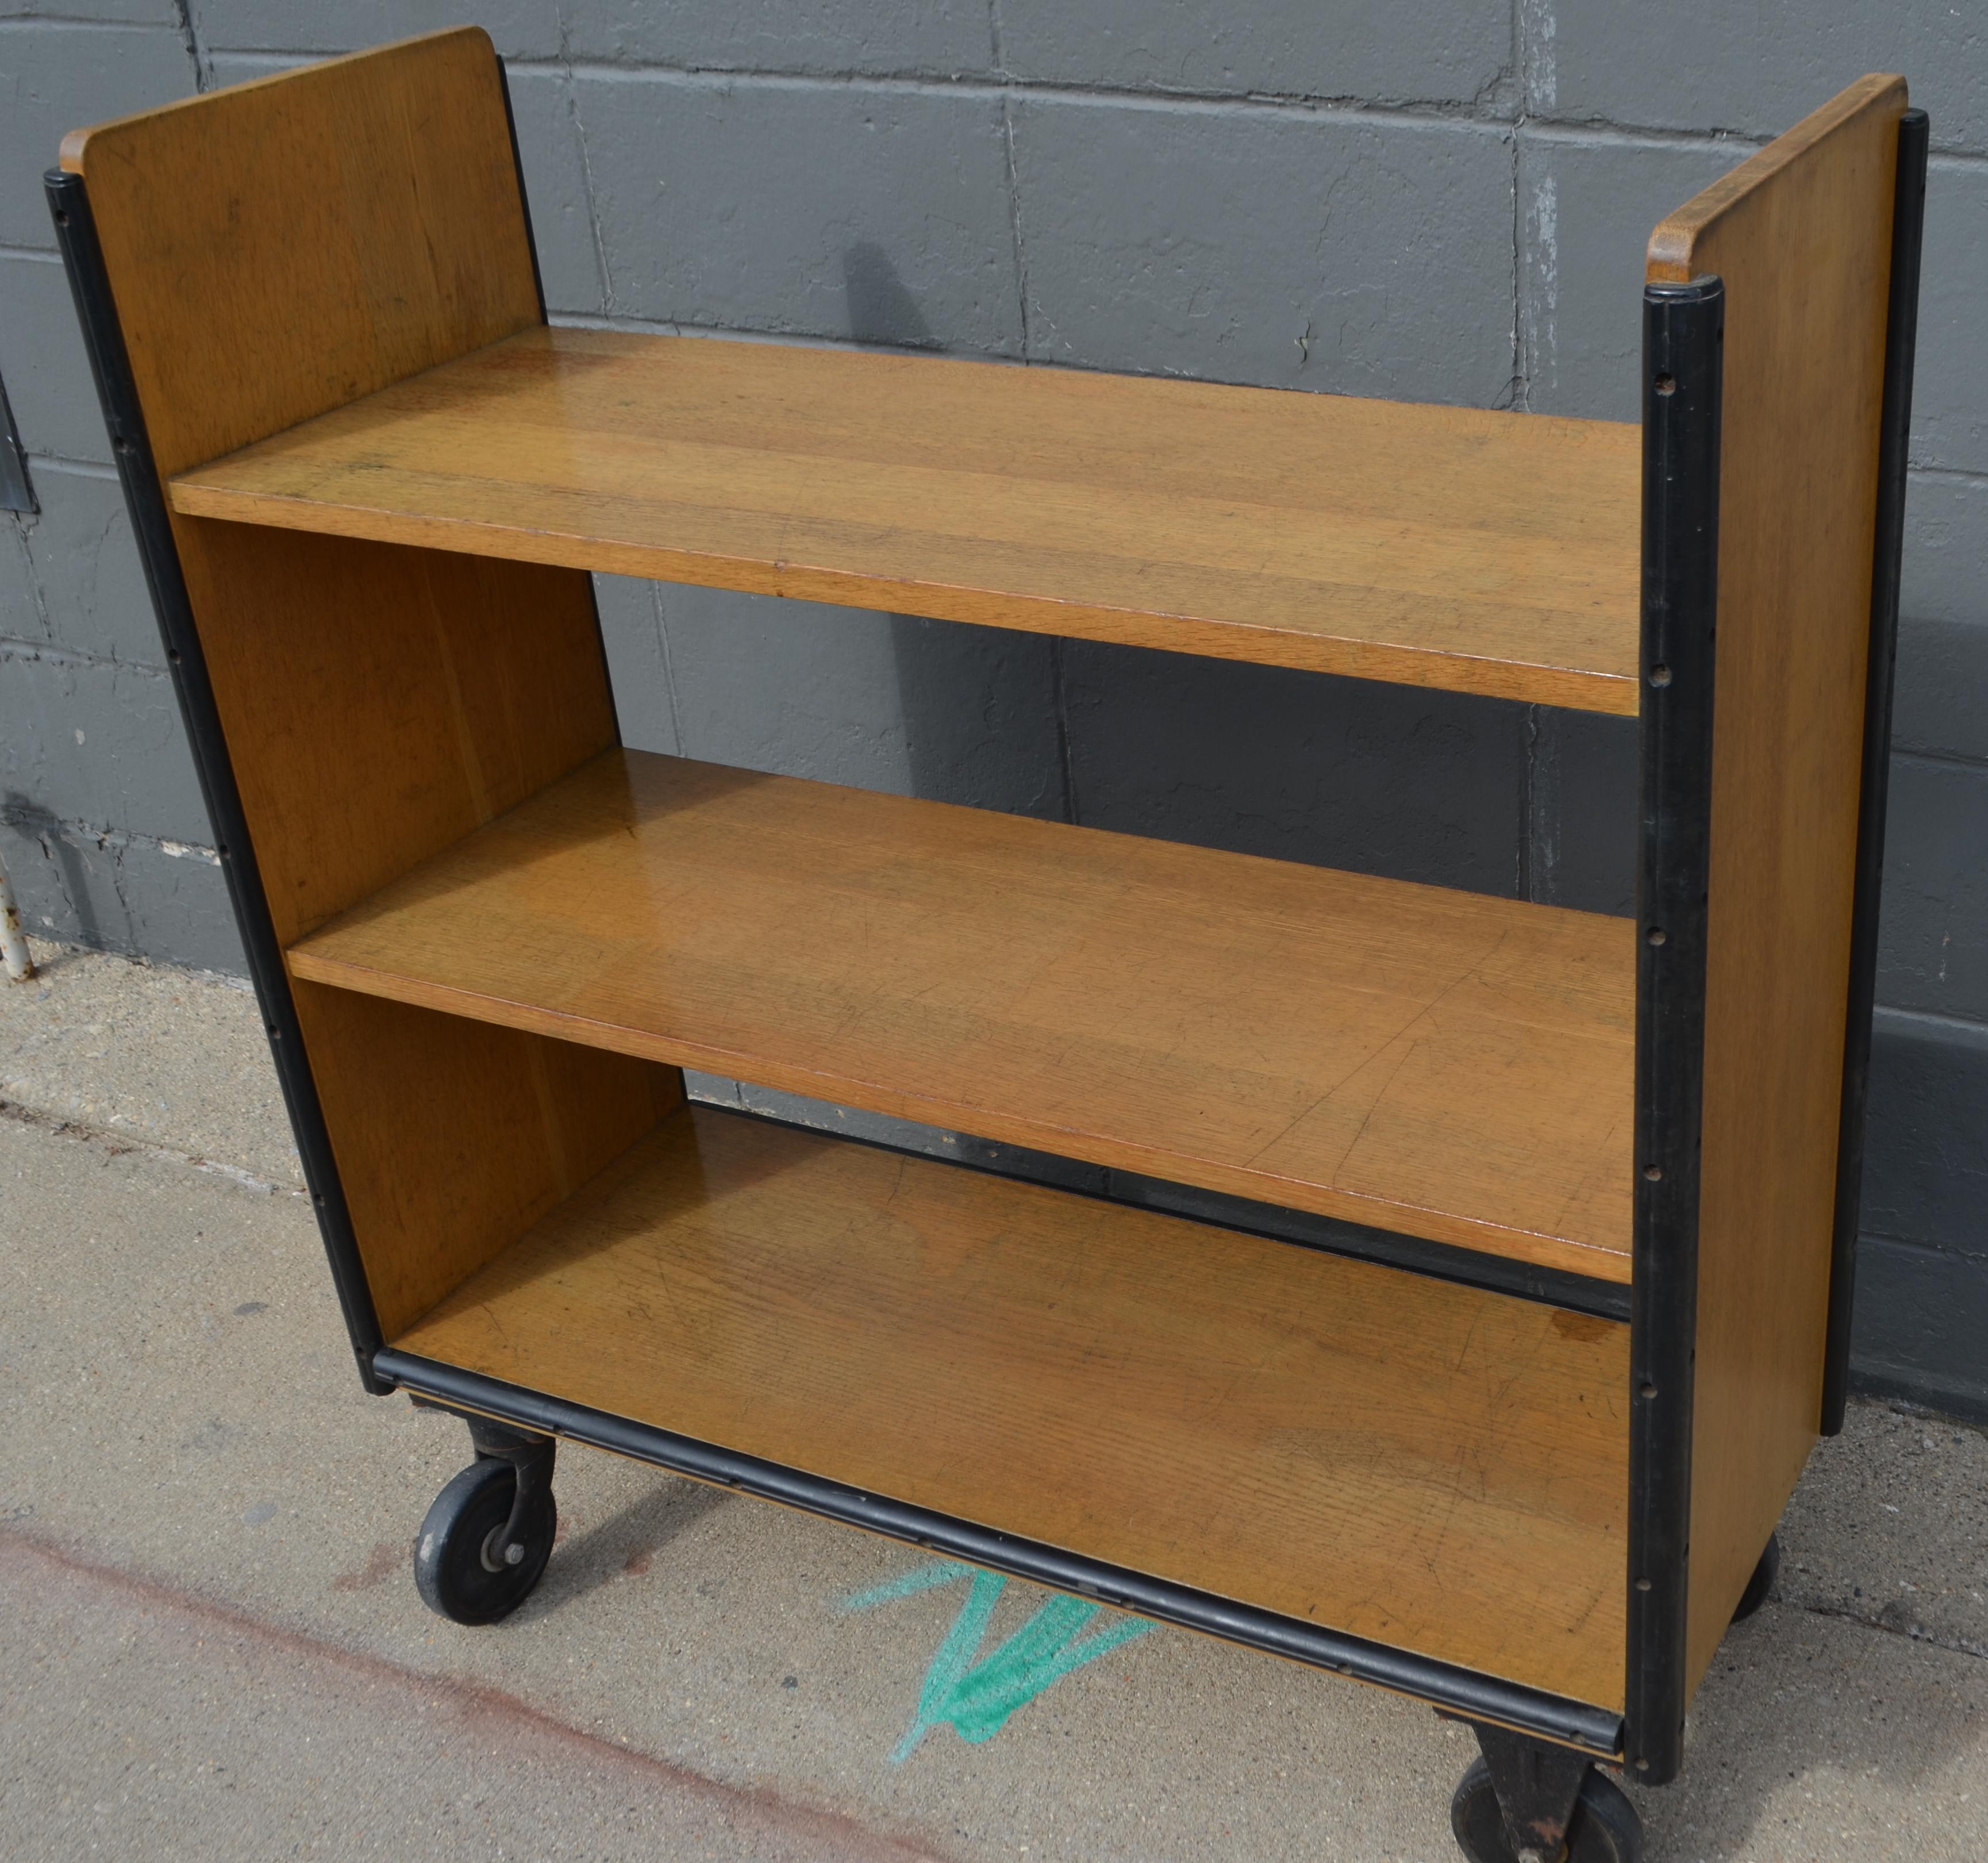 American Midcentury Book Shelving Cart of Oak on Wheels from Midwestern Public Library